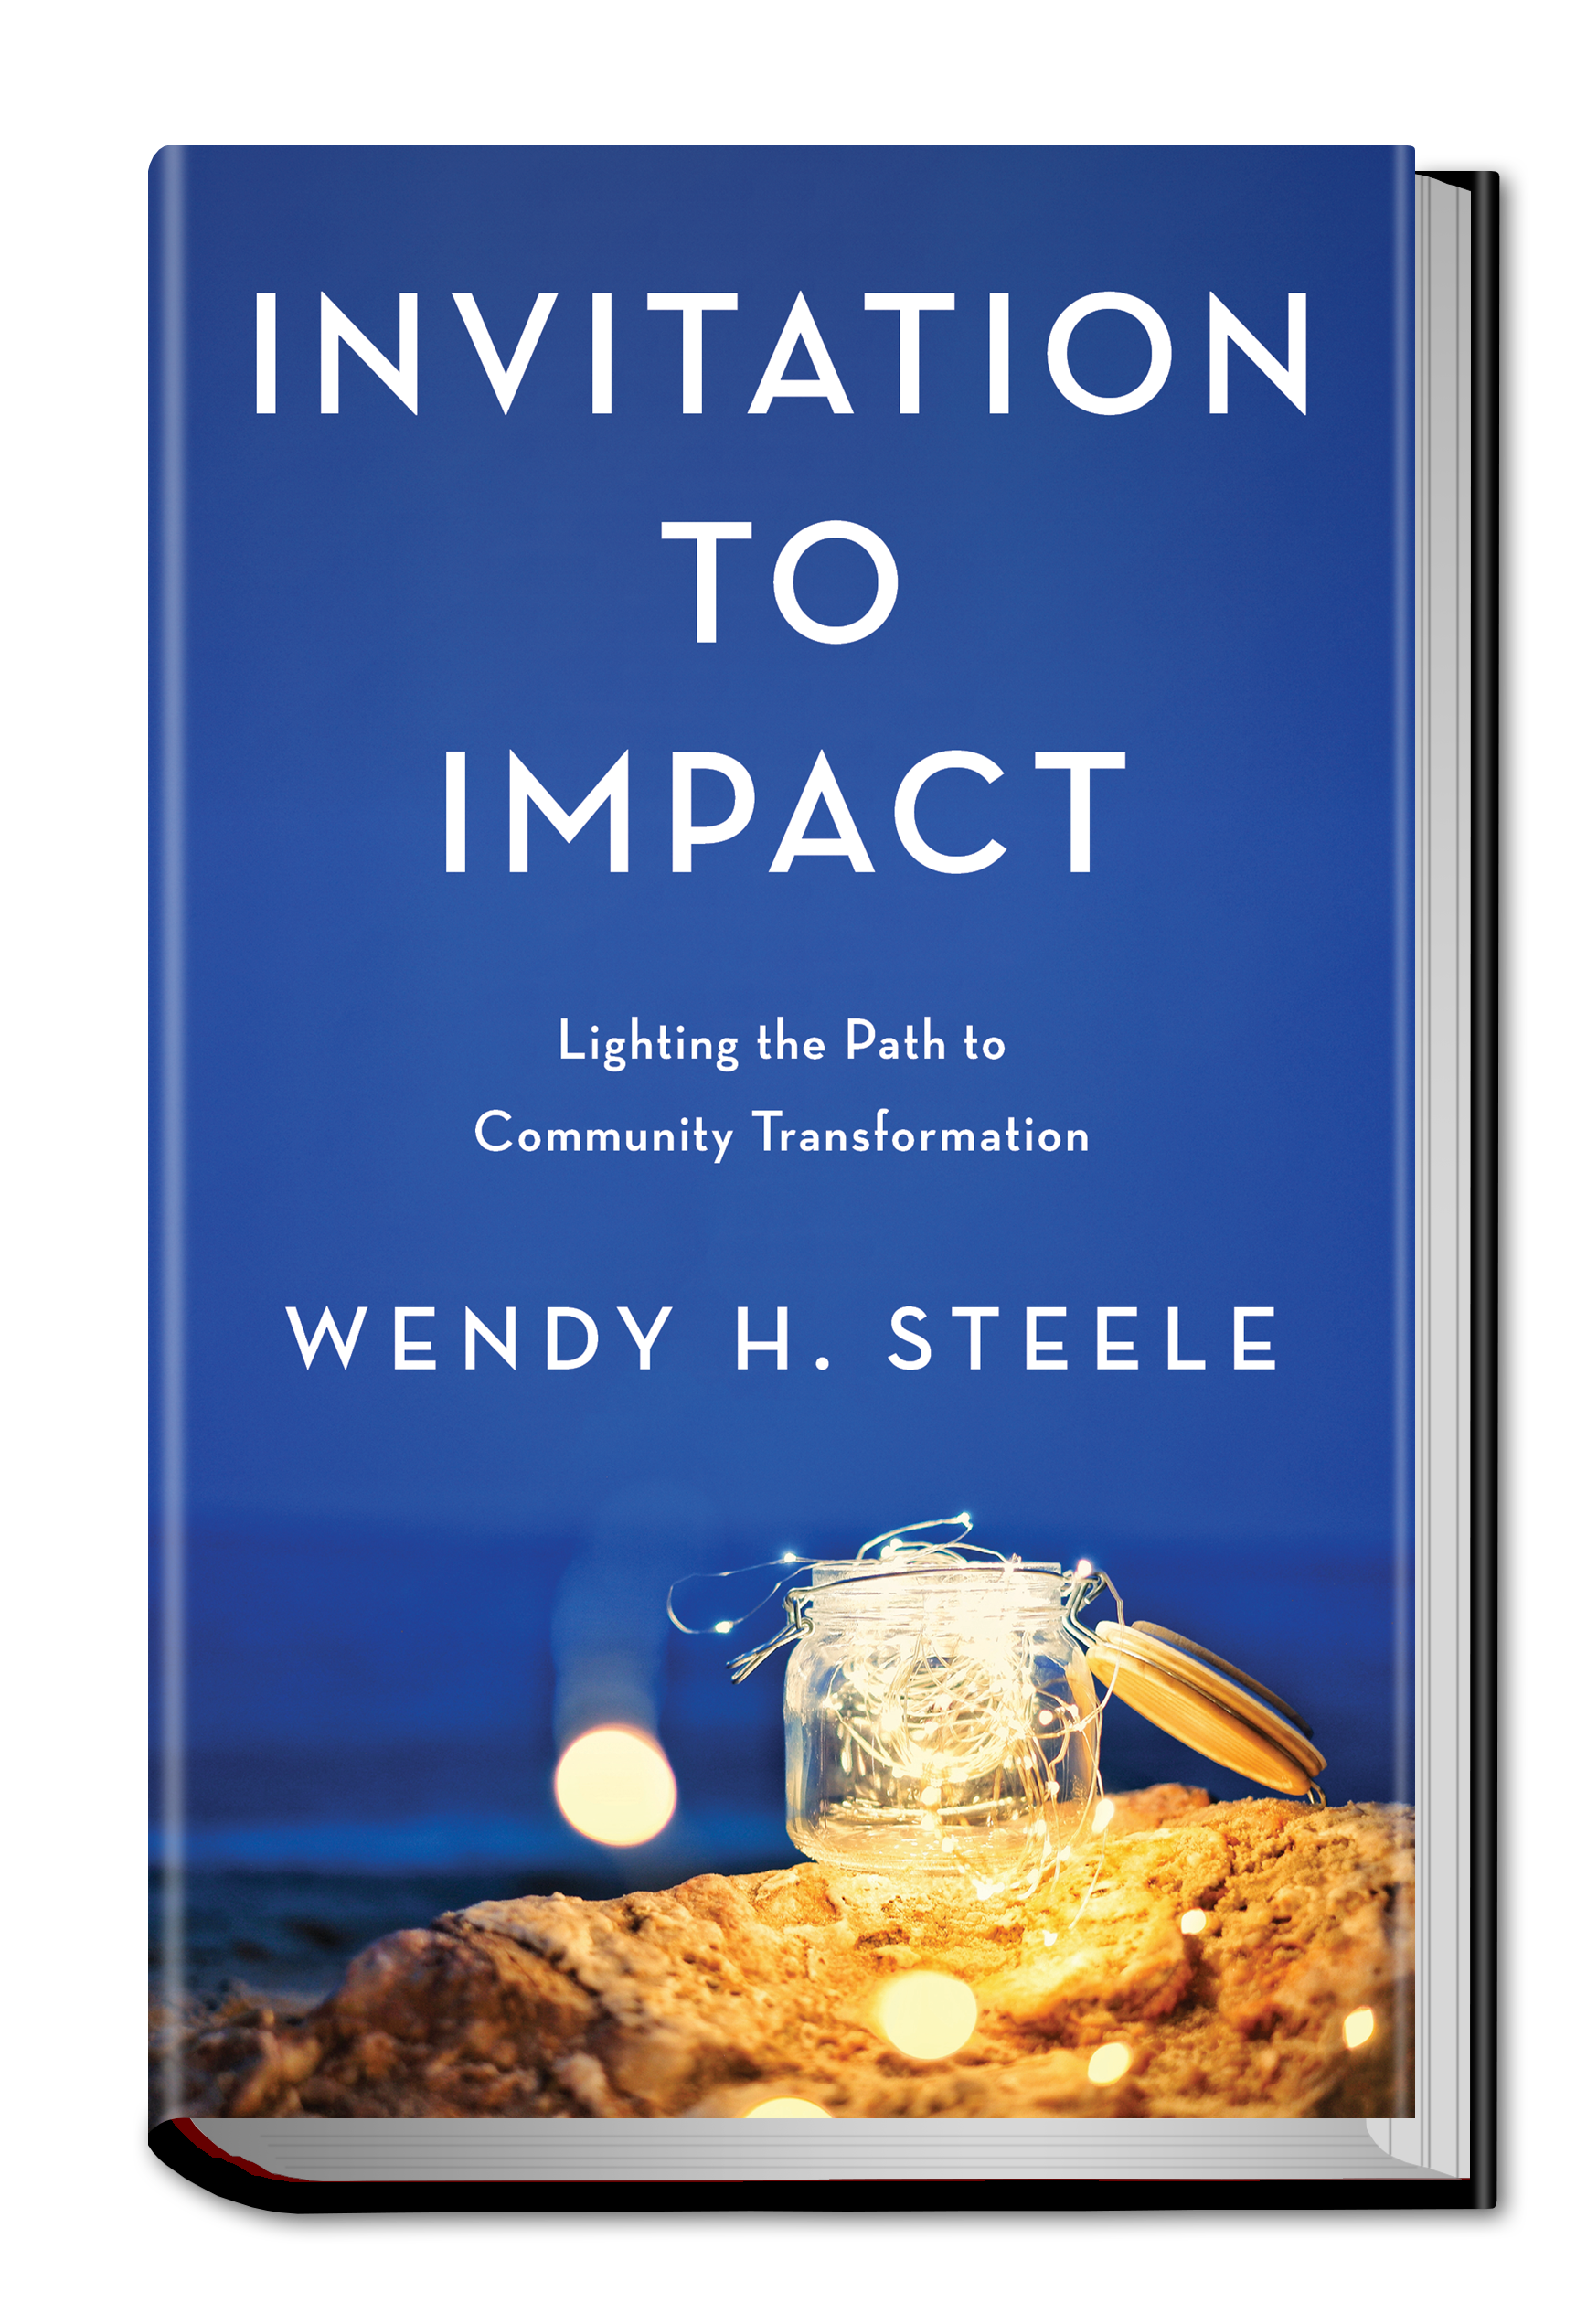 Invitation to Impact, a book about the founding of Impact100 by Wendy H. Steele